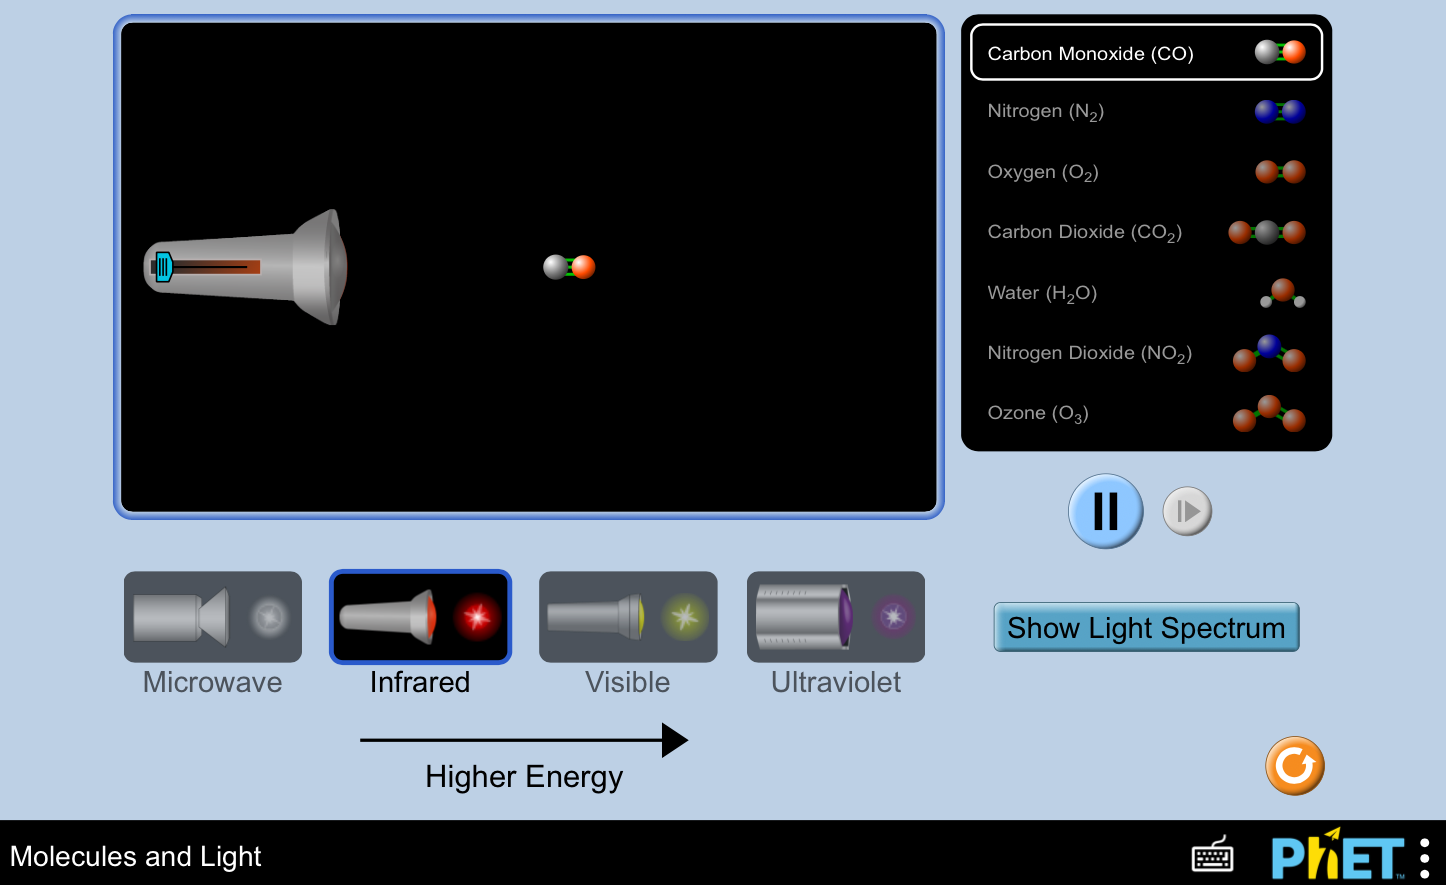 Screenshot: Phet Simulation - Molecules and Light.  Various options of Microwave, Infrared, Visible and ultra violet light sources.  Options to choose Carbon Monoxide, Nitrogen, Oxygen, Carbon Dioxide, Water Nitrogen or Ozone, with buttons to start pause the simulation and to show the light spectrum.